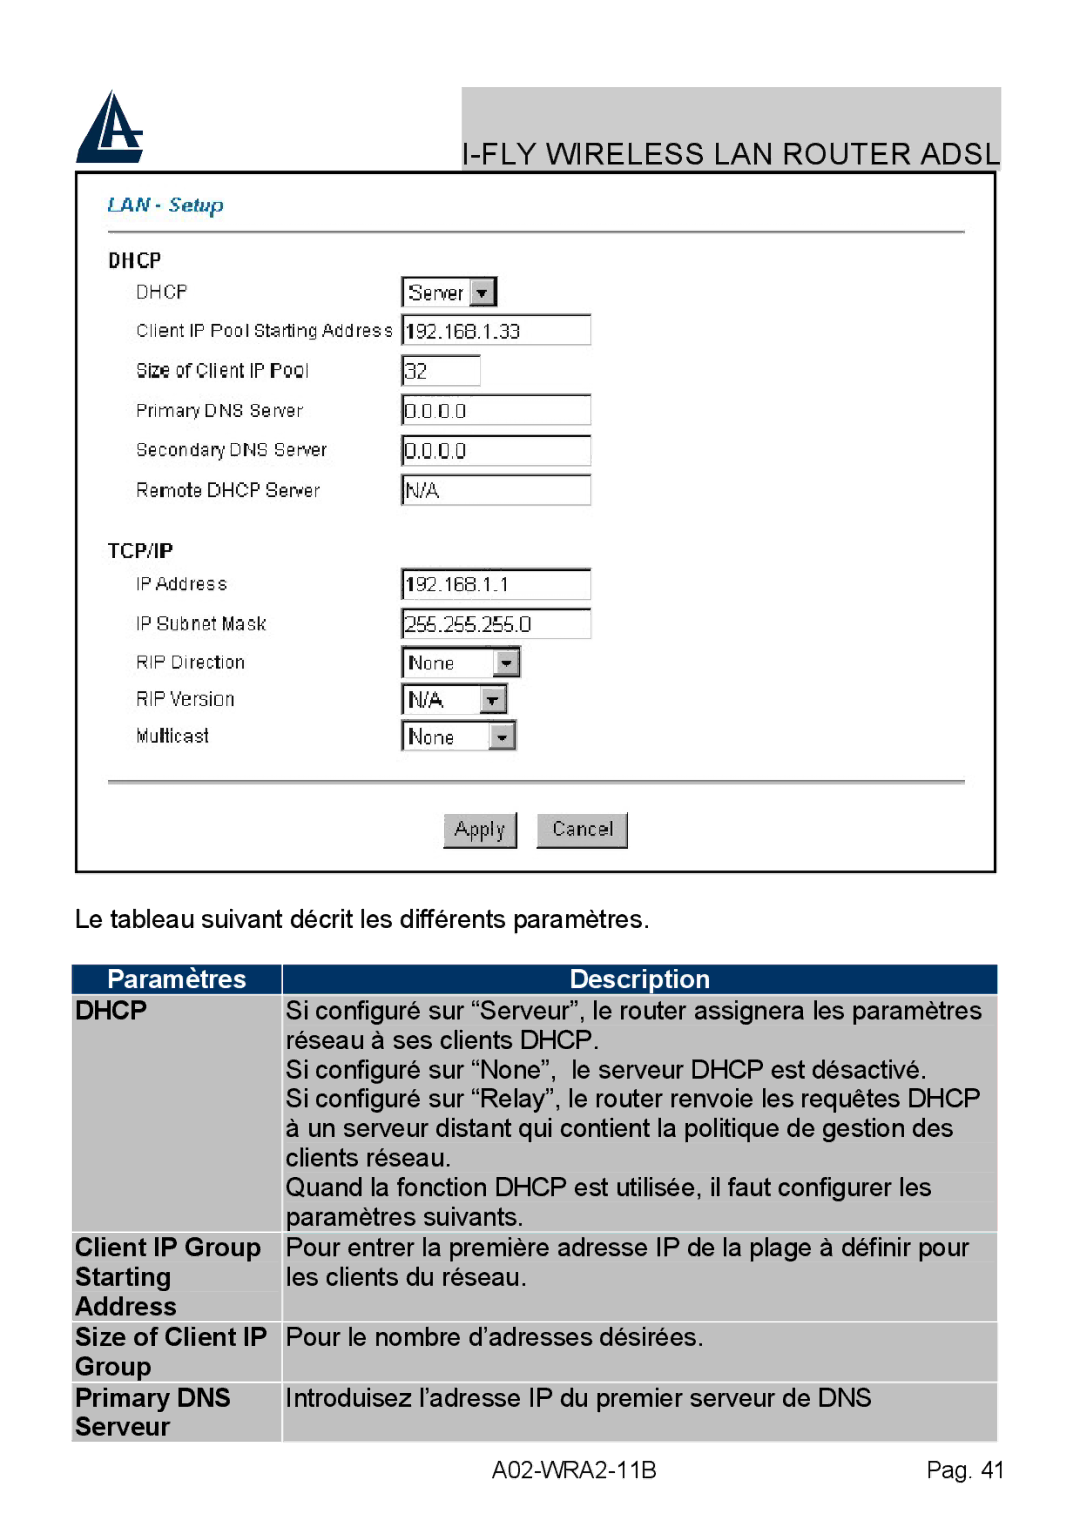 Bissell A02-WRA2-11B manual Starting, Address Size of Client IP, Group Primary DNS 